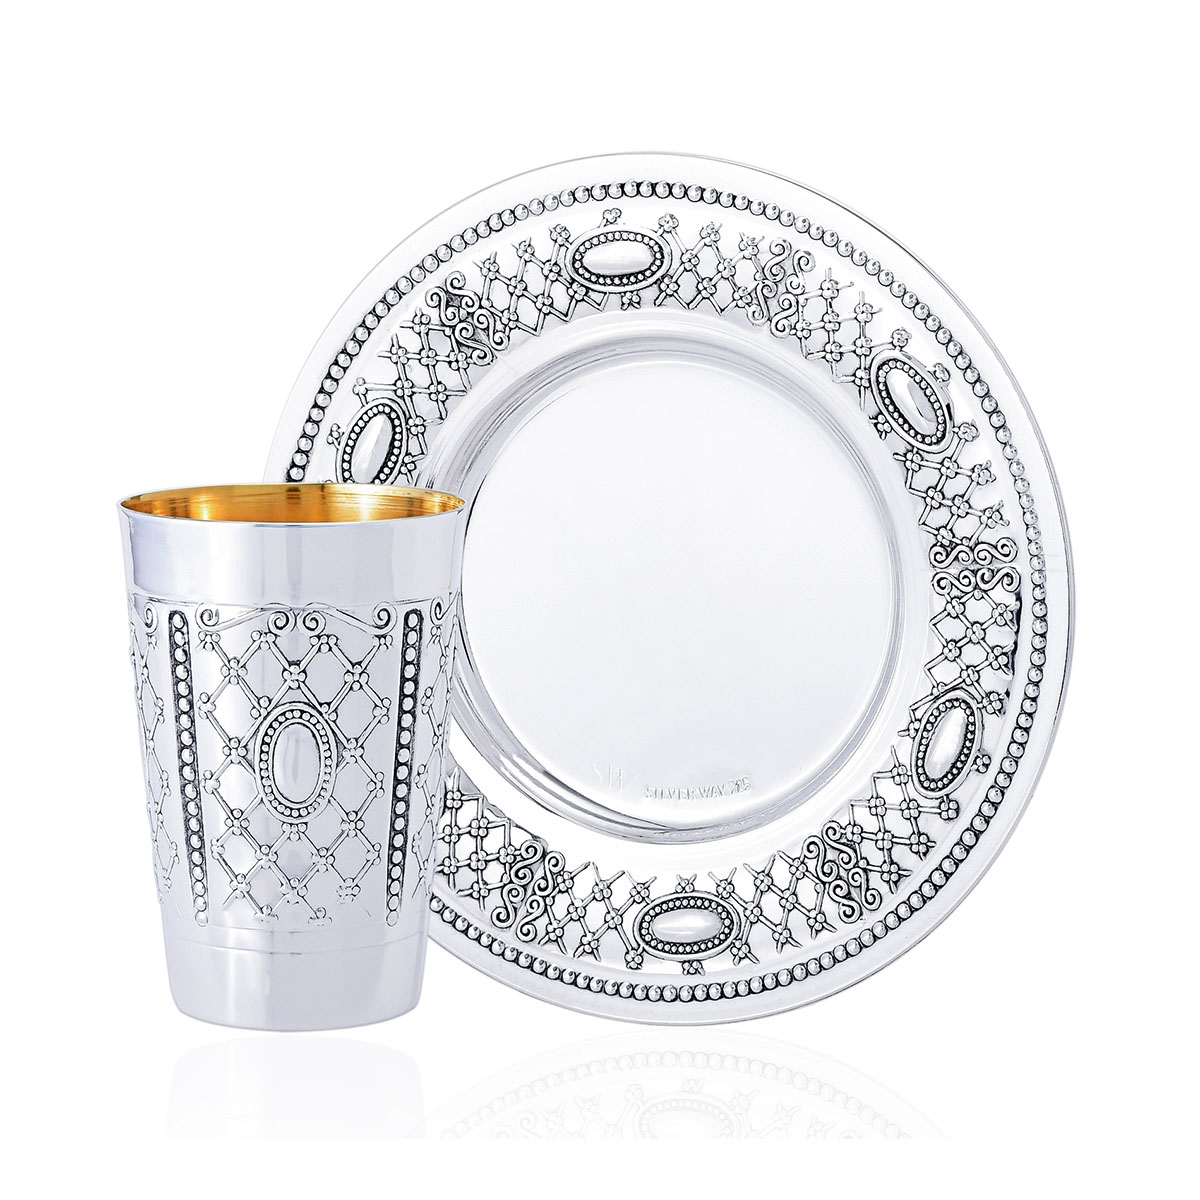 Luxurious 925 Sterling Silver Kiddush Cup Set With Ornate Designs - 1